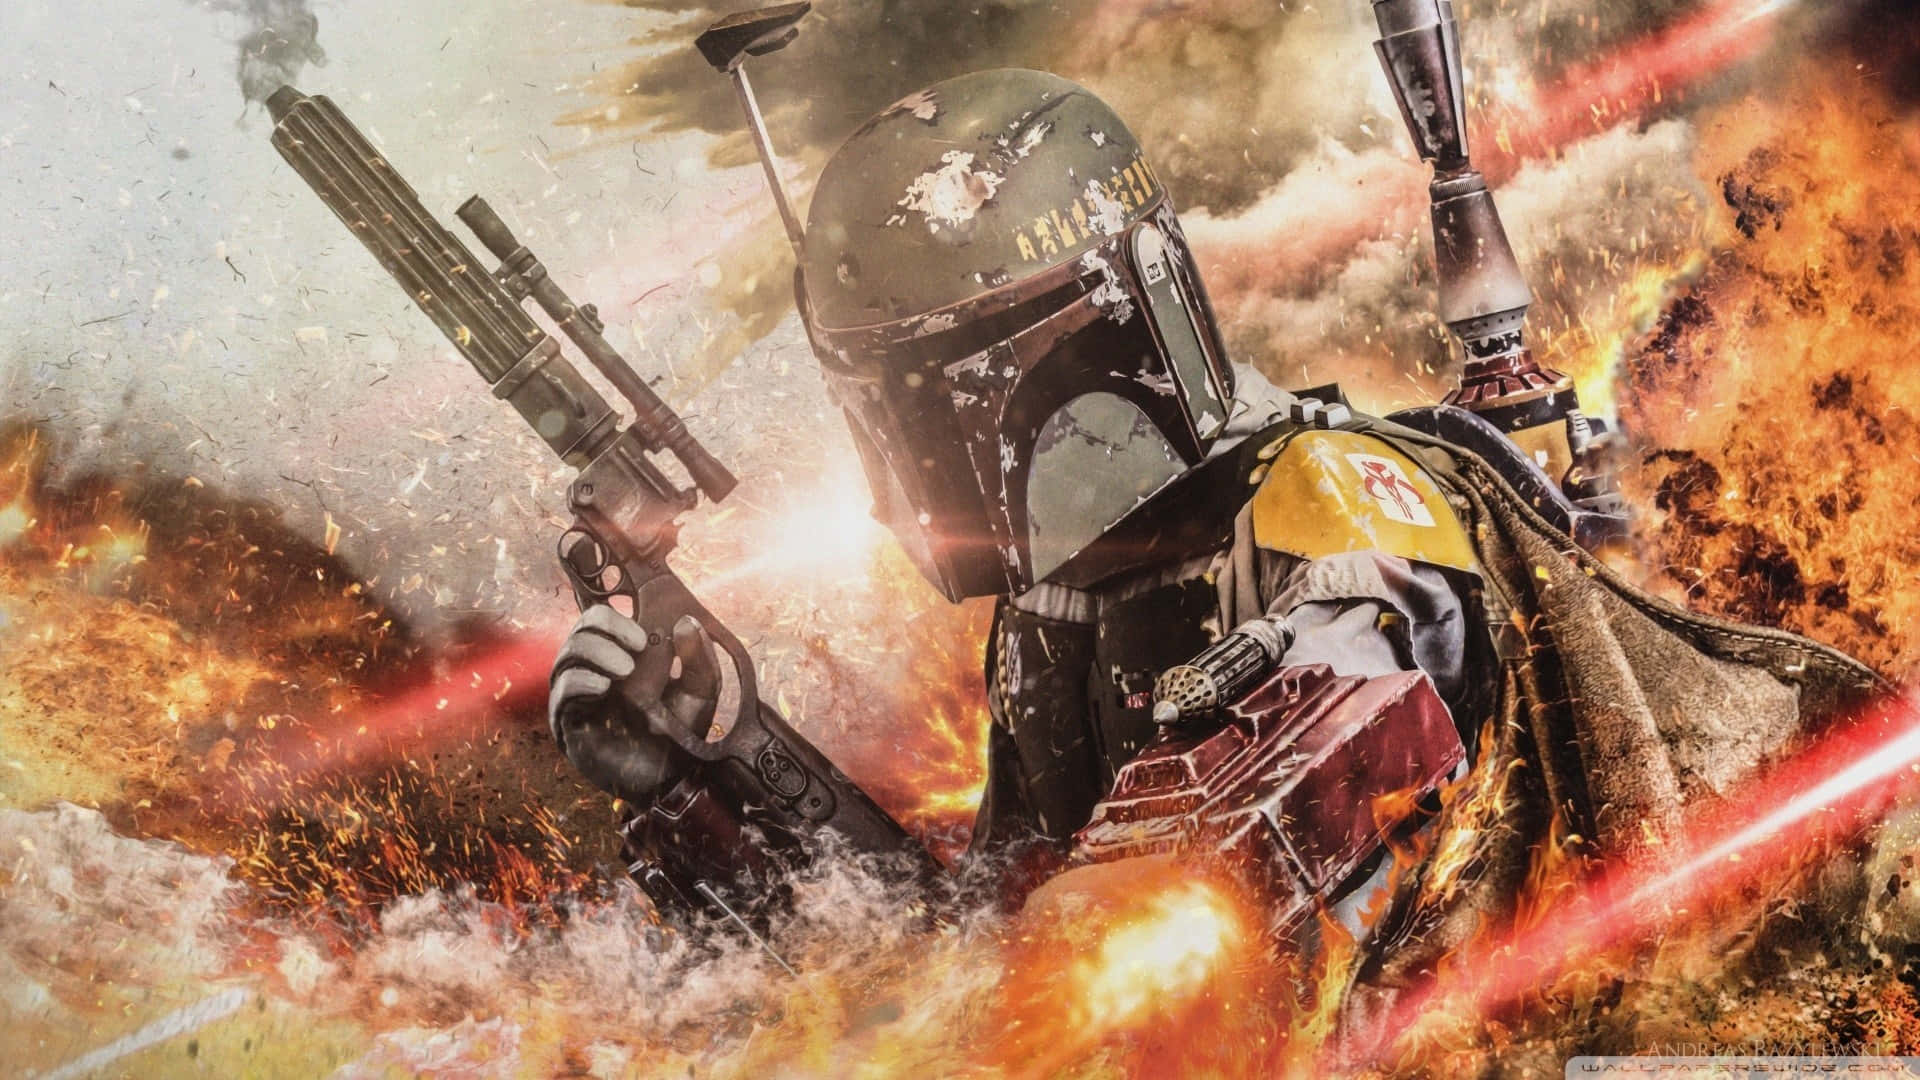 Boba Fett poised for action in a colorful, artistic, and futuristic depiction